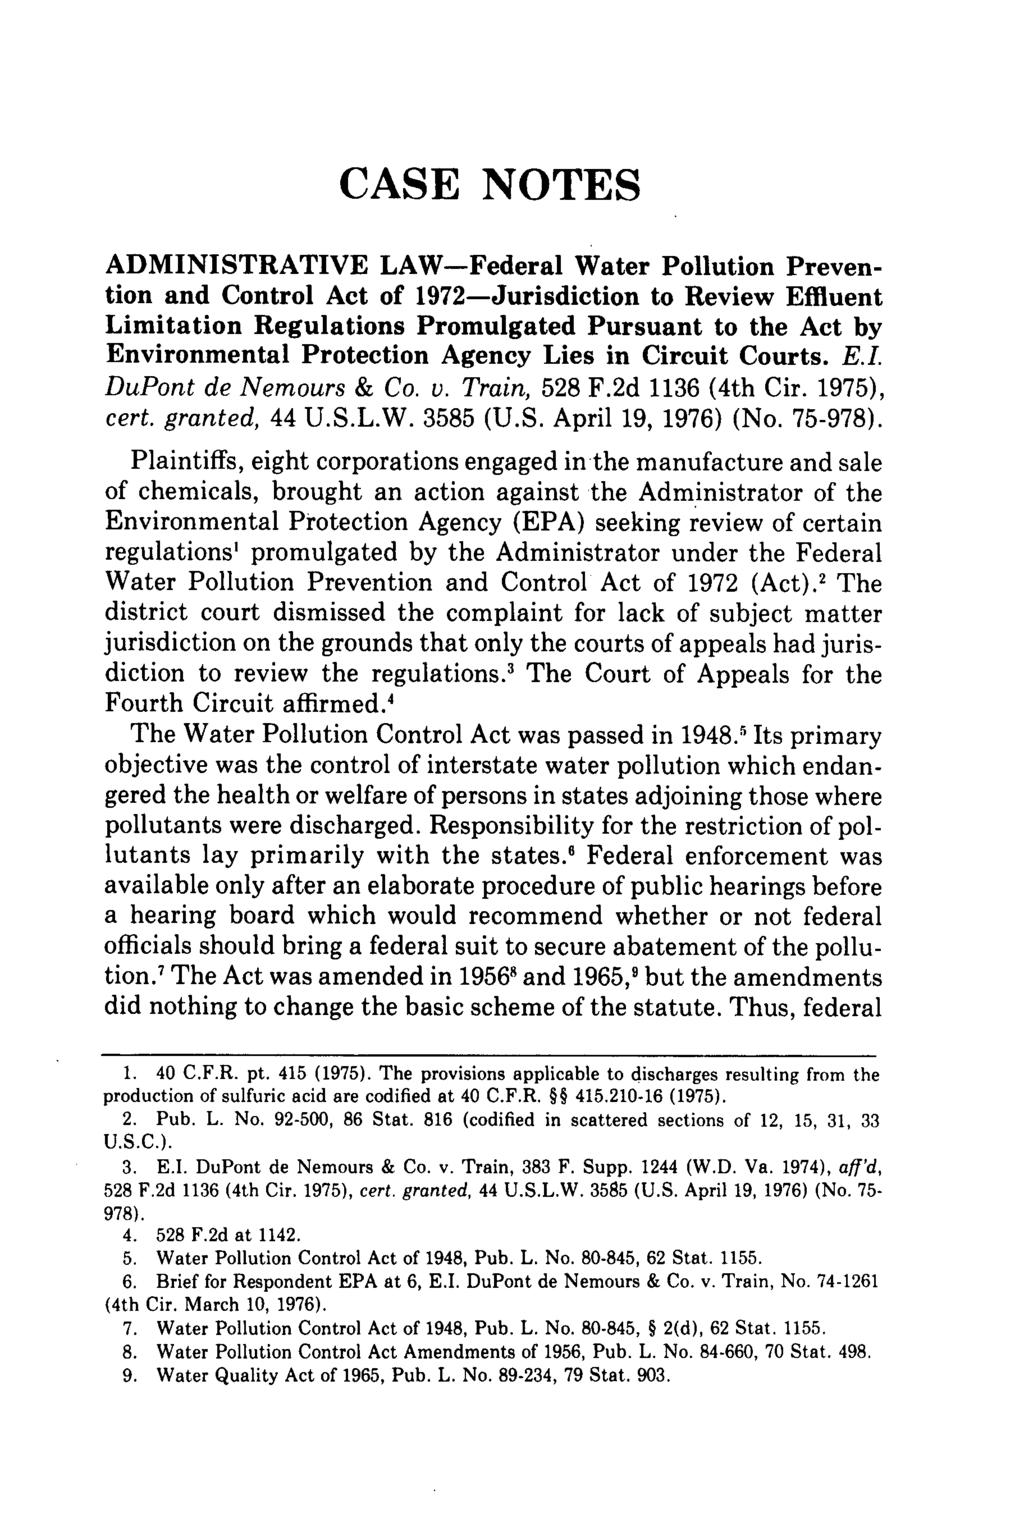 CASE NOTES ADMINISTRATIVE LAW-Federal Water Pollution Prevention and Control Act of 1972-Jurisdiction to Review Effluent Limitation Regulations Promulgated Pursuant to the Act by Environmental